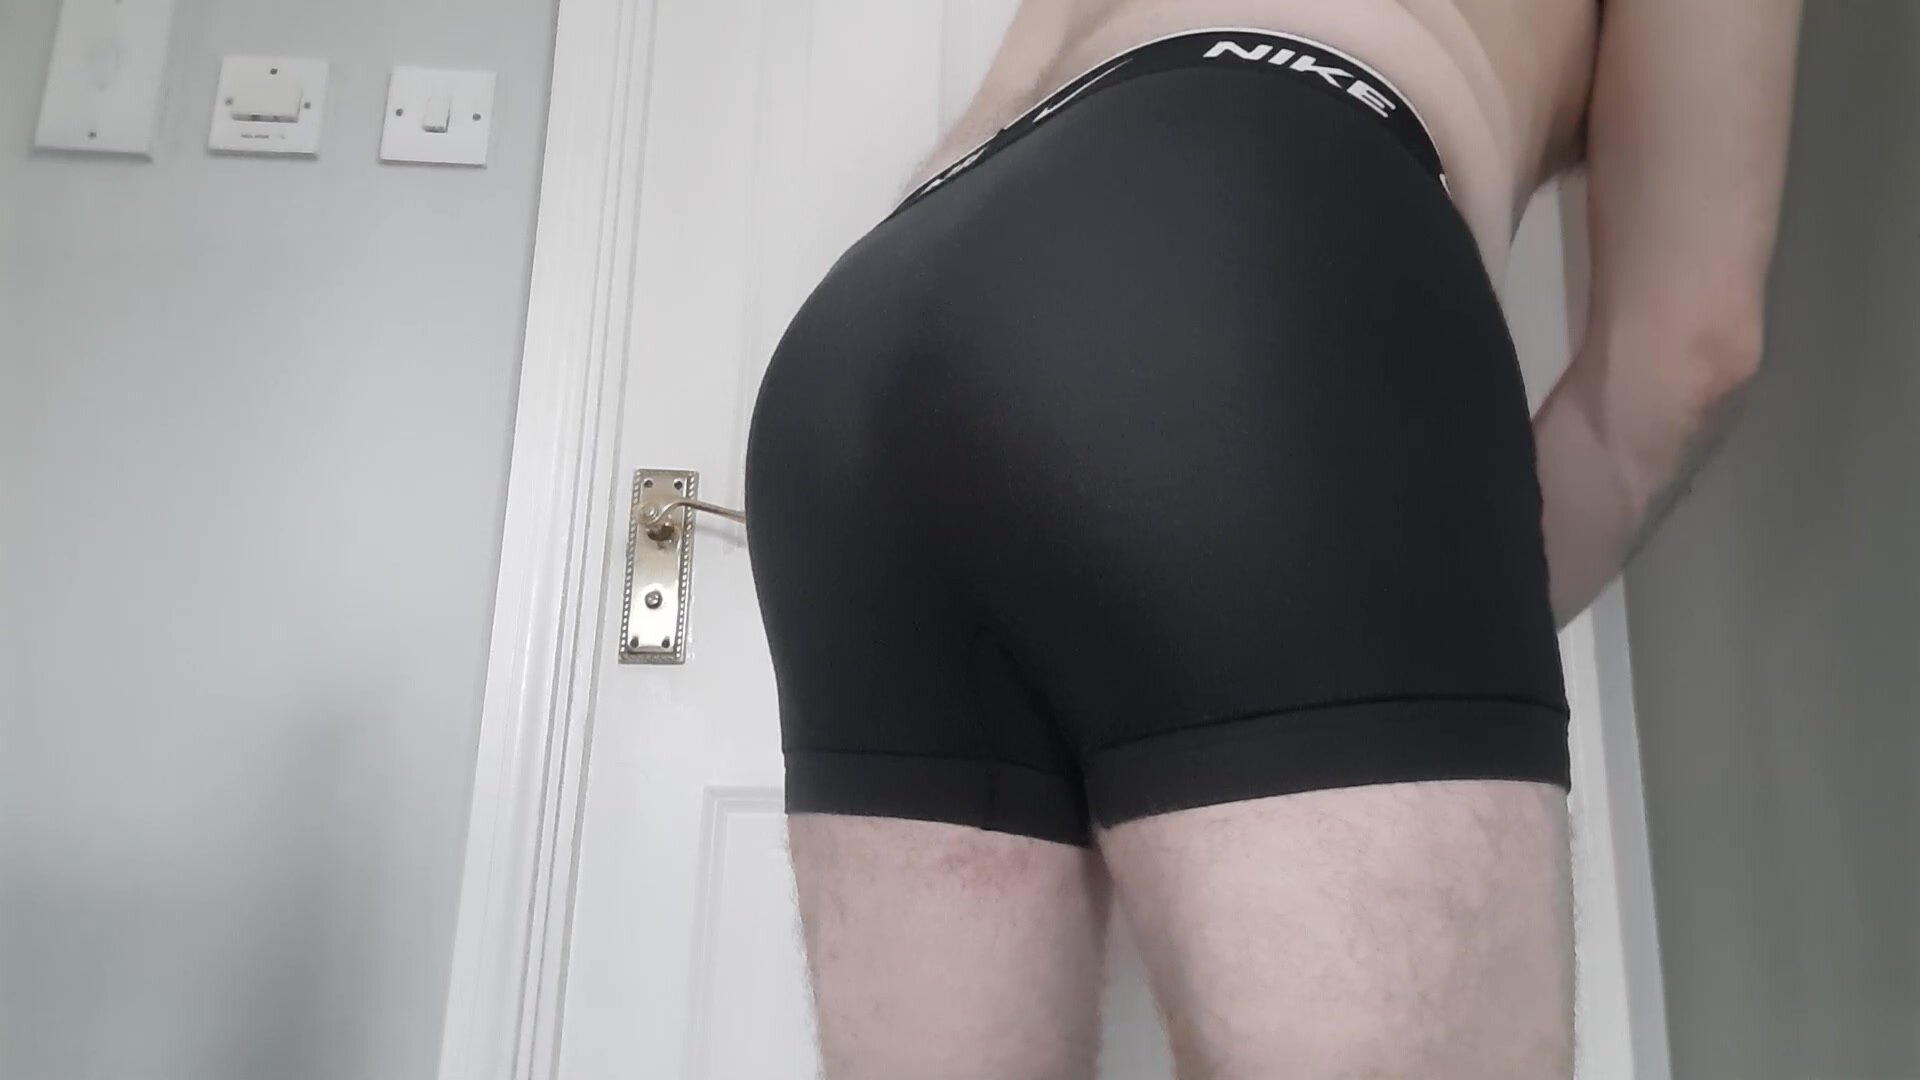 Farting and playing with my bulge